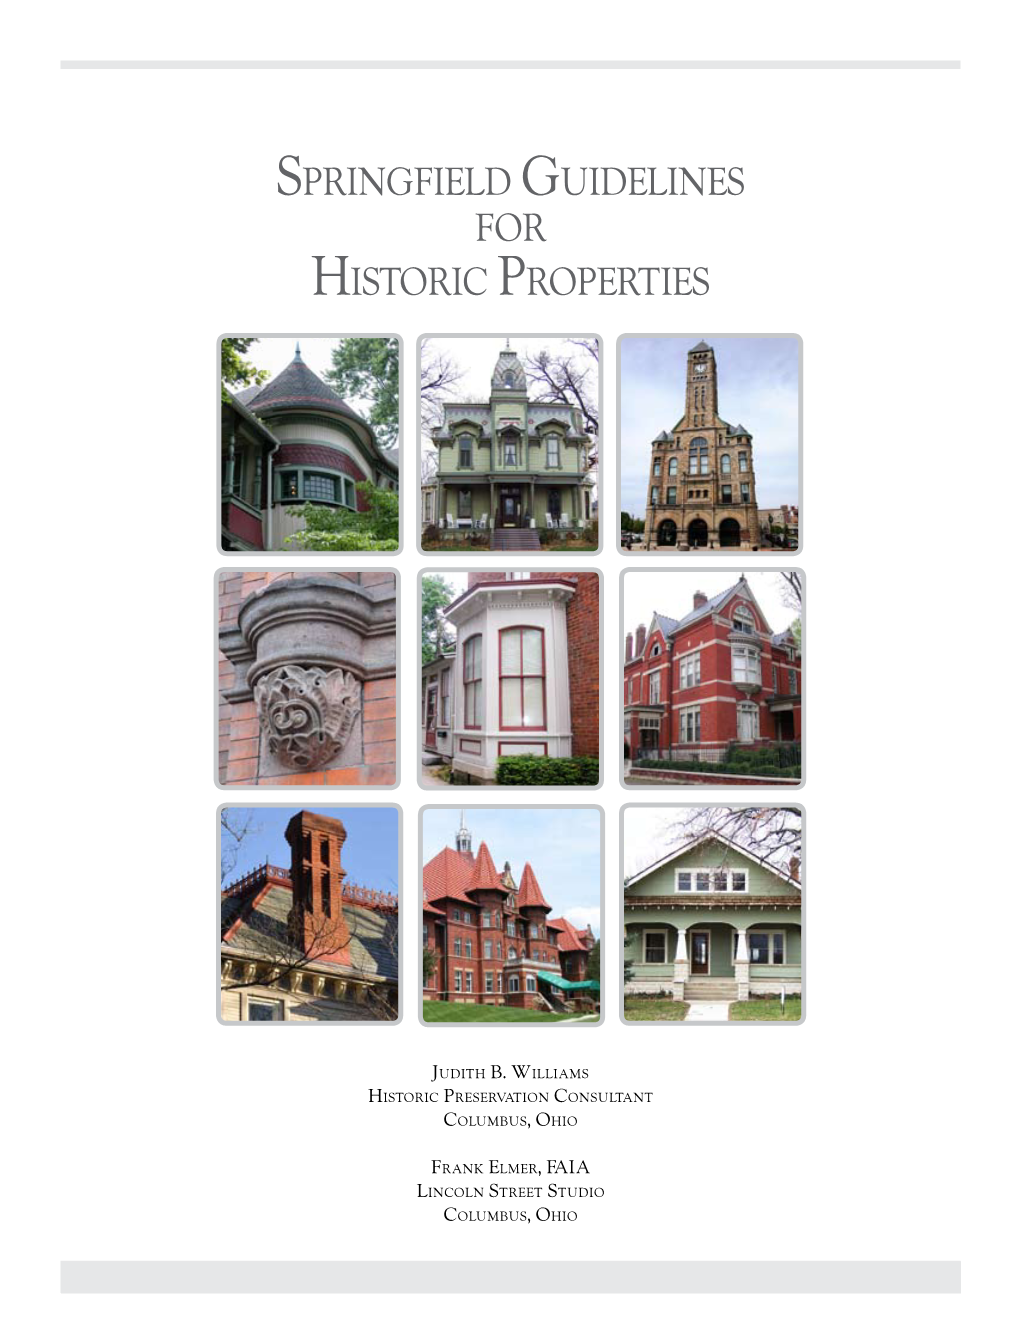 SPRINGFIELD Guidelines for Historic Properties > Contents 3 Introduction